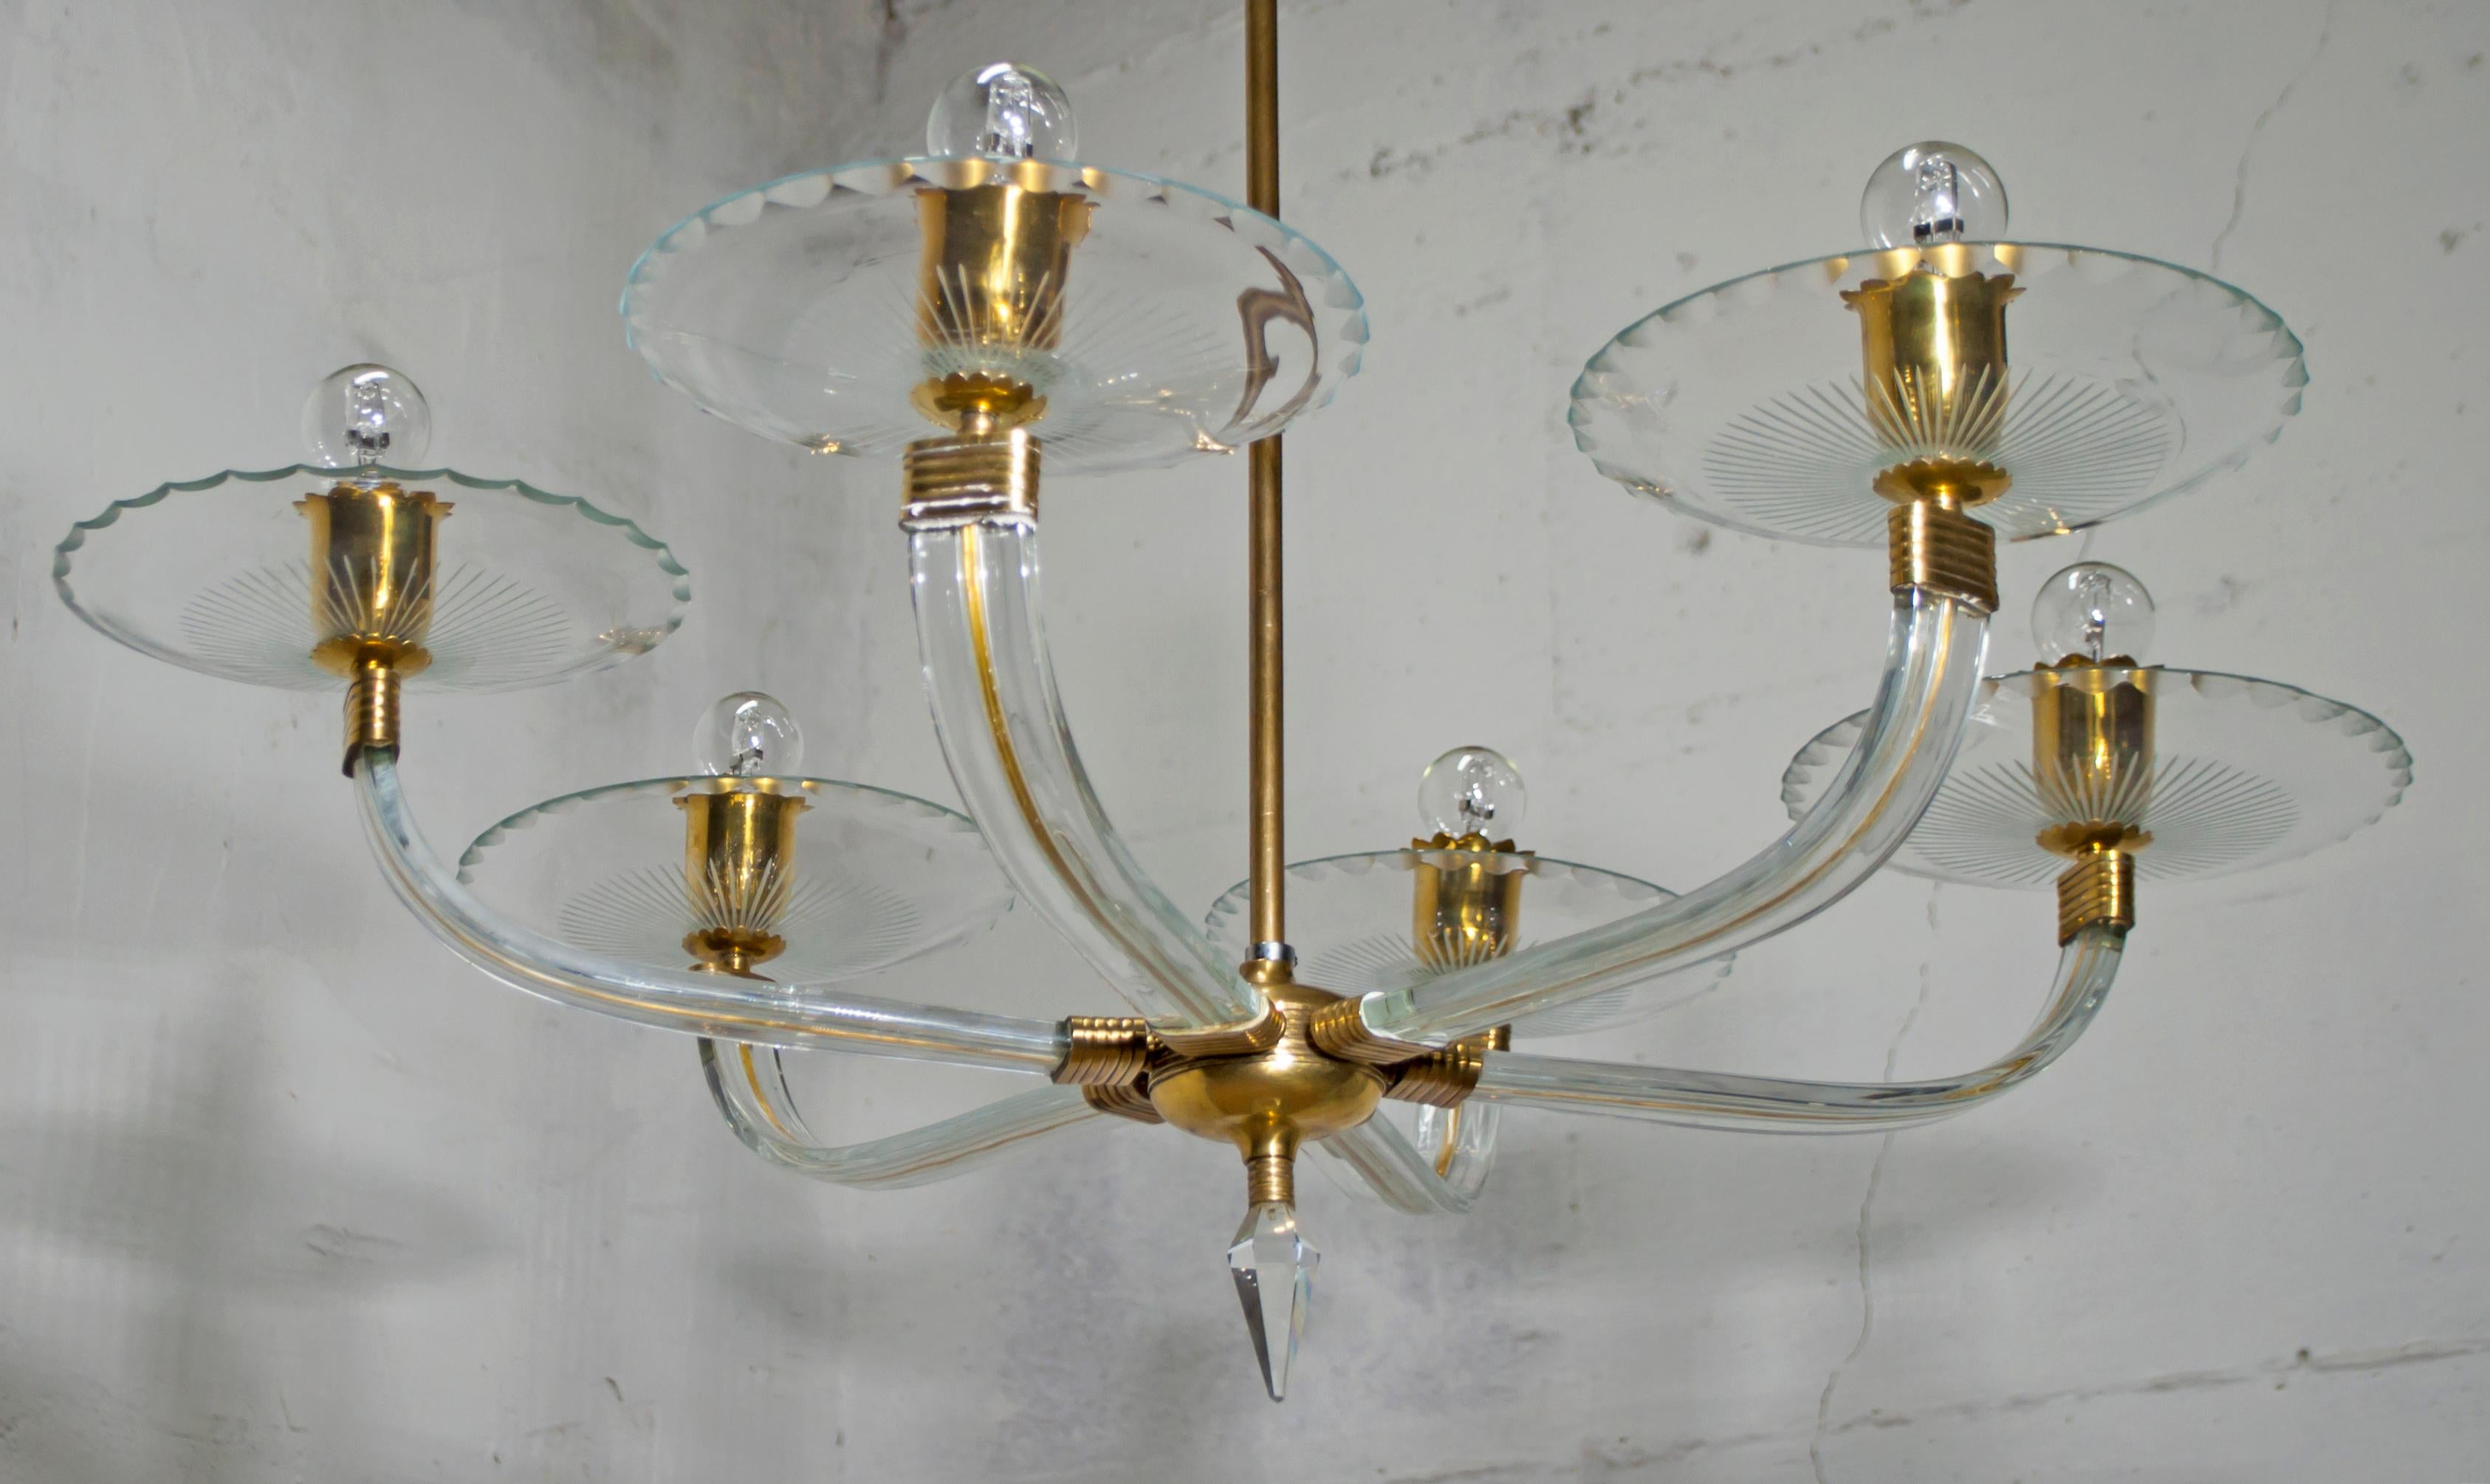 This chandelier from the 1940s in brass and Murano crystal, with 6 lights on hand-engraved crystal plates, with a prism-shaped crystal tip.

This artistic glassware has existed since the mid-thirteenth century.

